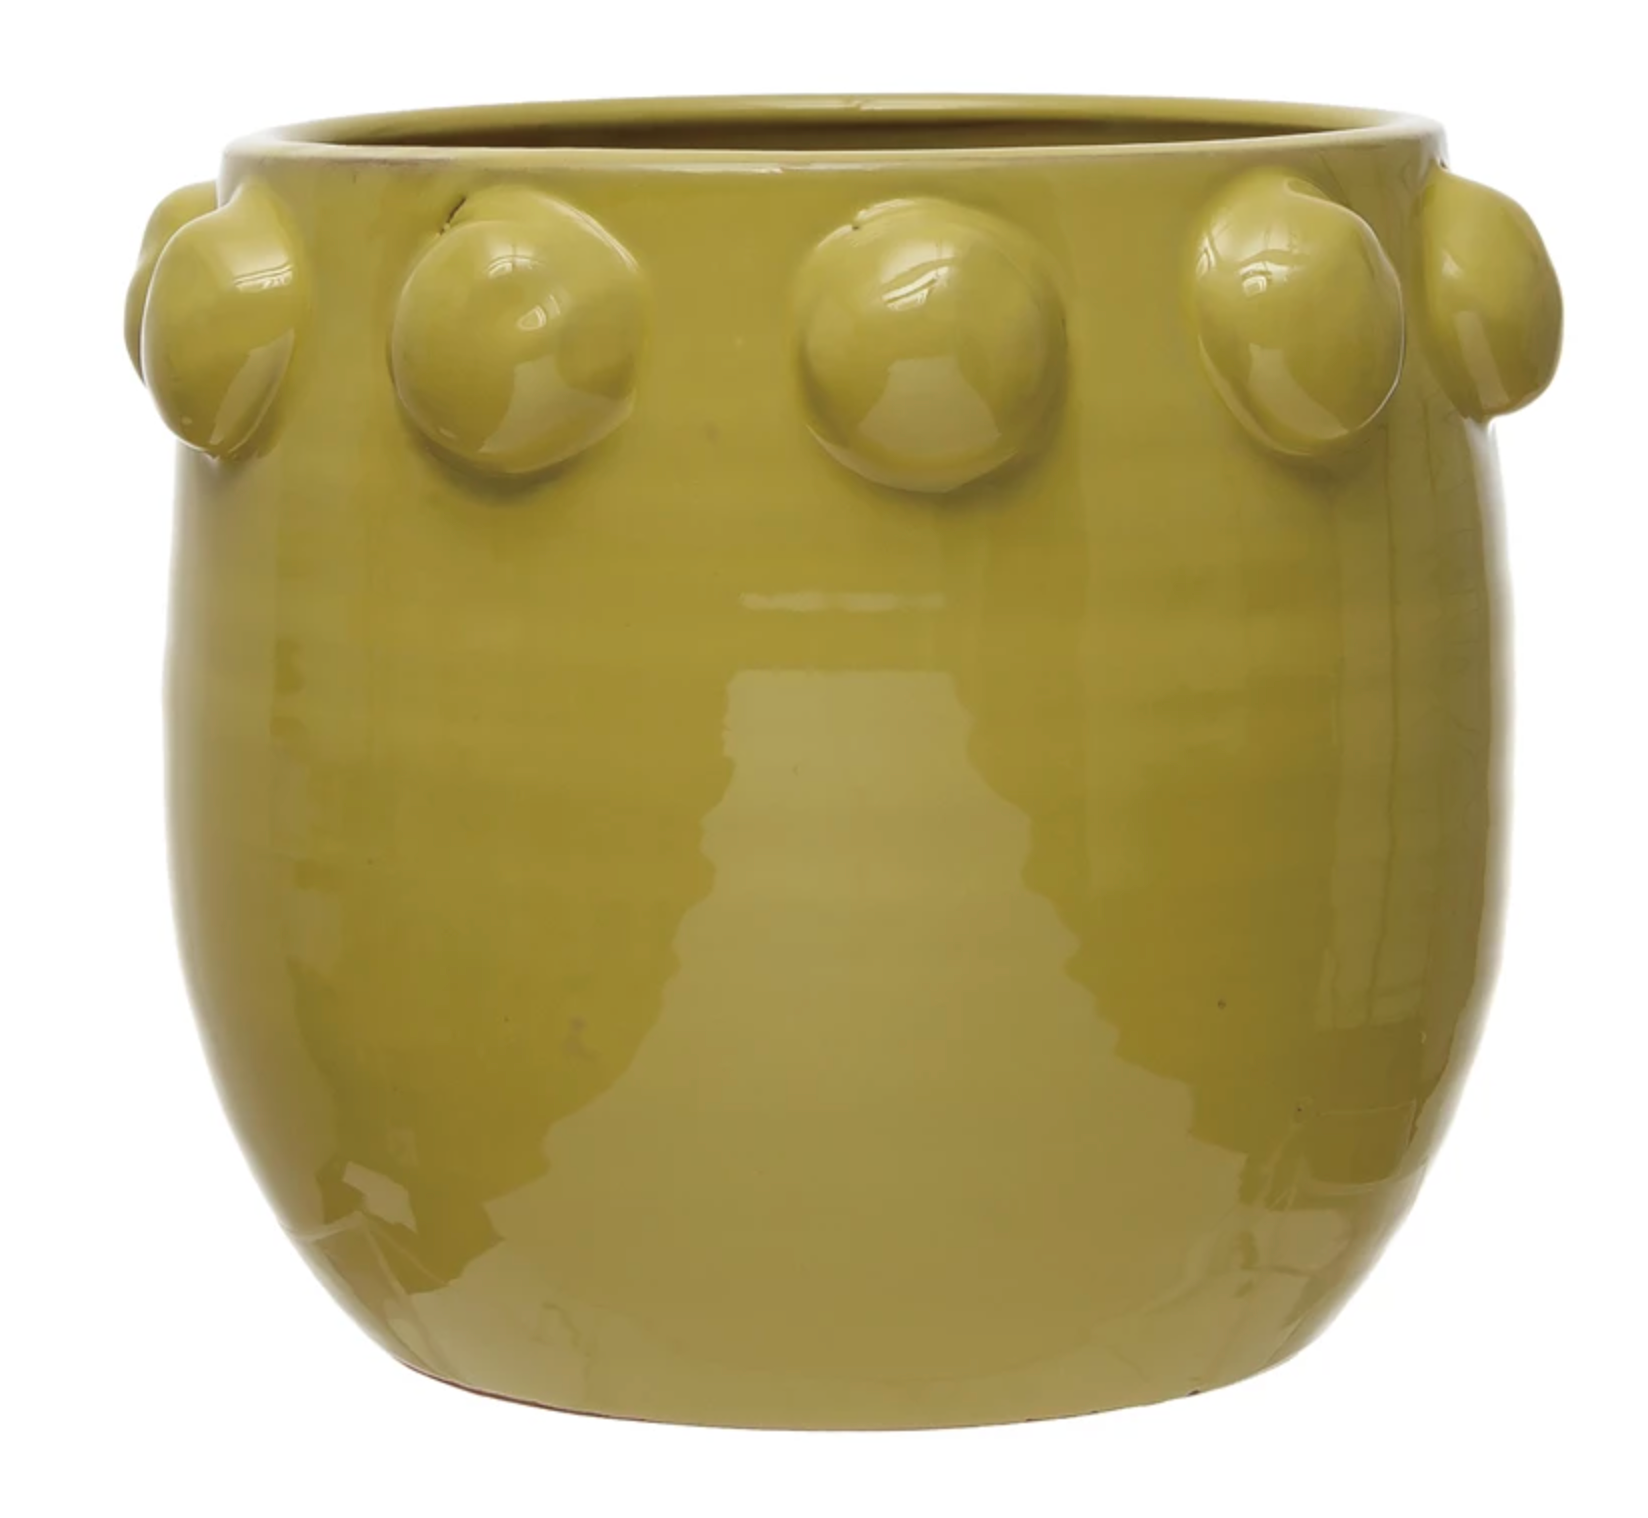 Terracotta Planter with Raised Dots